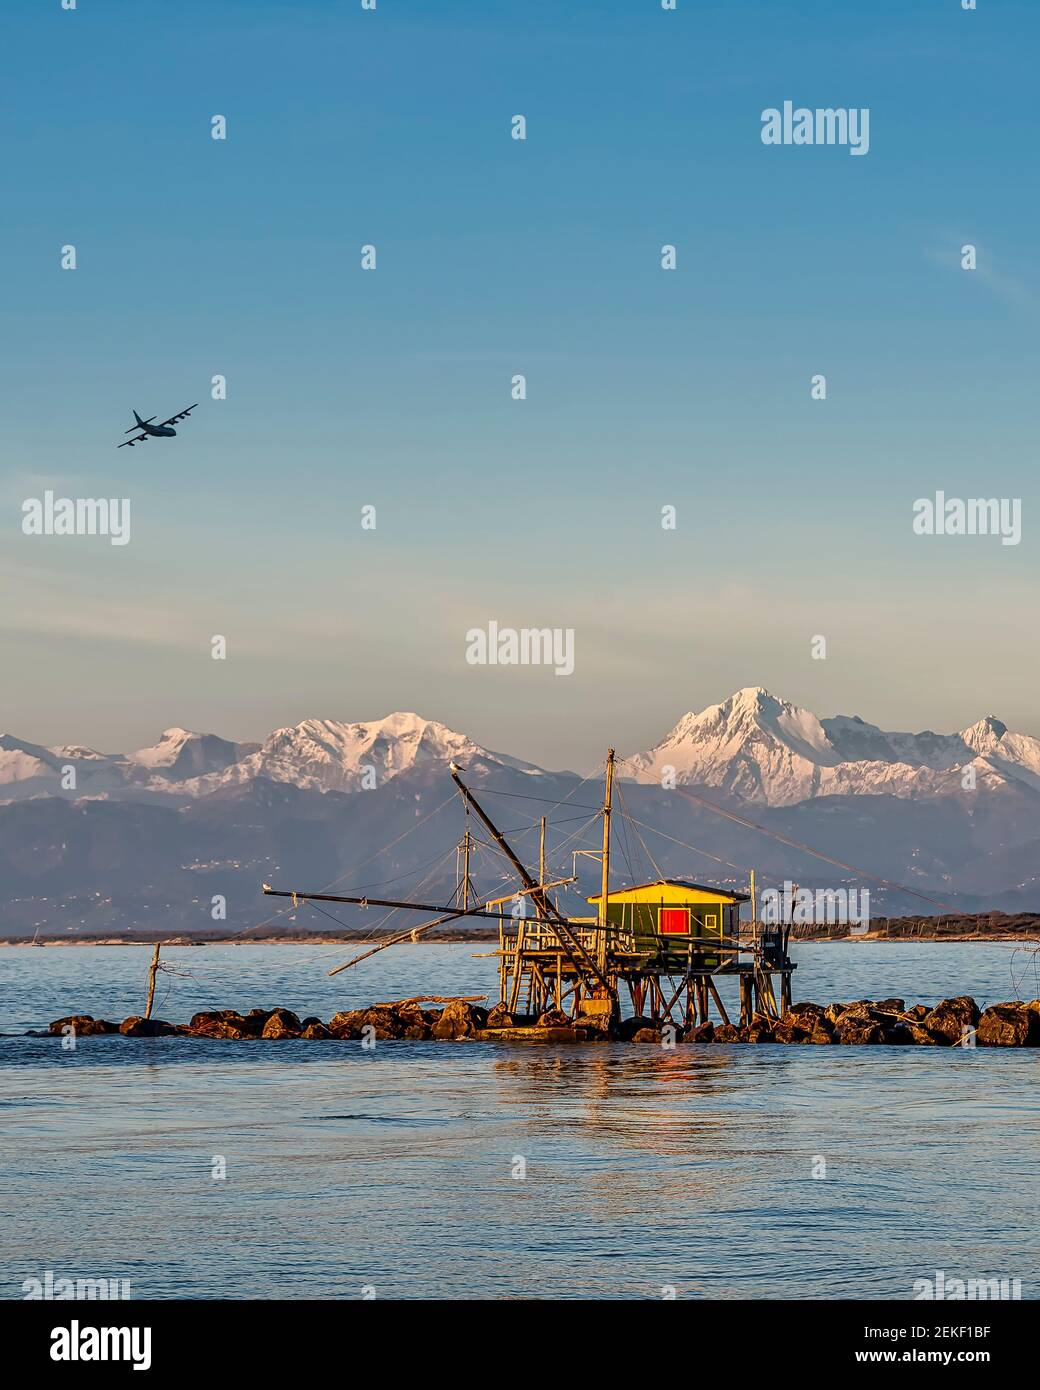 An airplane flies over a trebuchet fishing hut at sunset, against the snow-capped Alps, Marina di Pisa, Tuscany, Italy Stock Photo